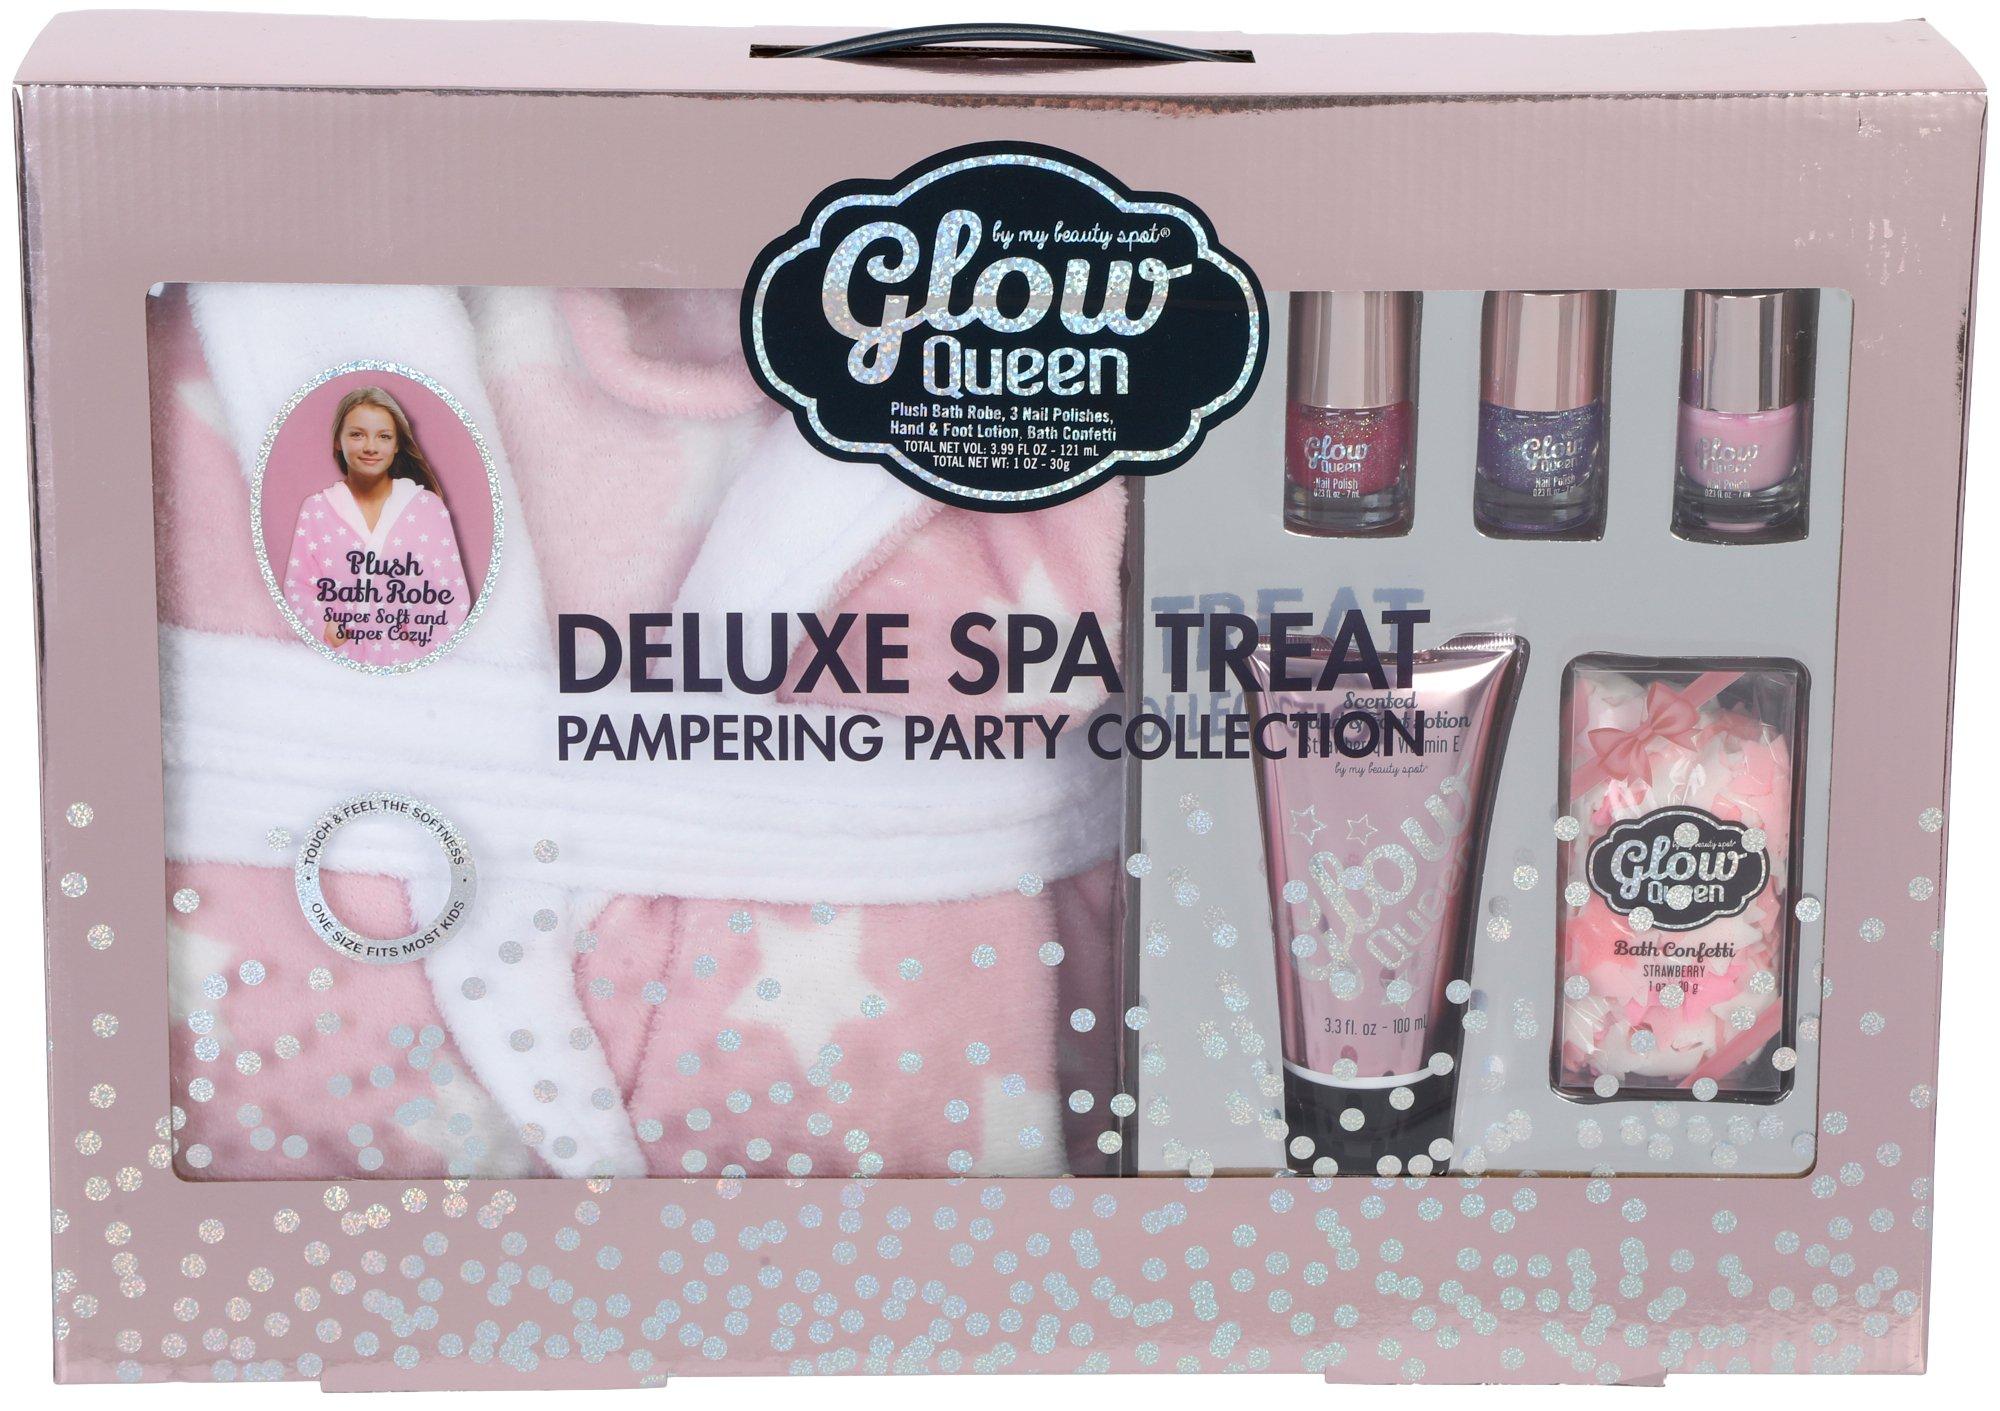 Deluxe Spa Treat Pampering Party Collection